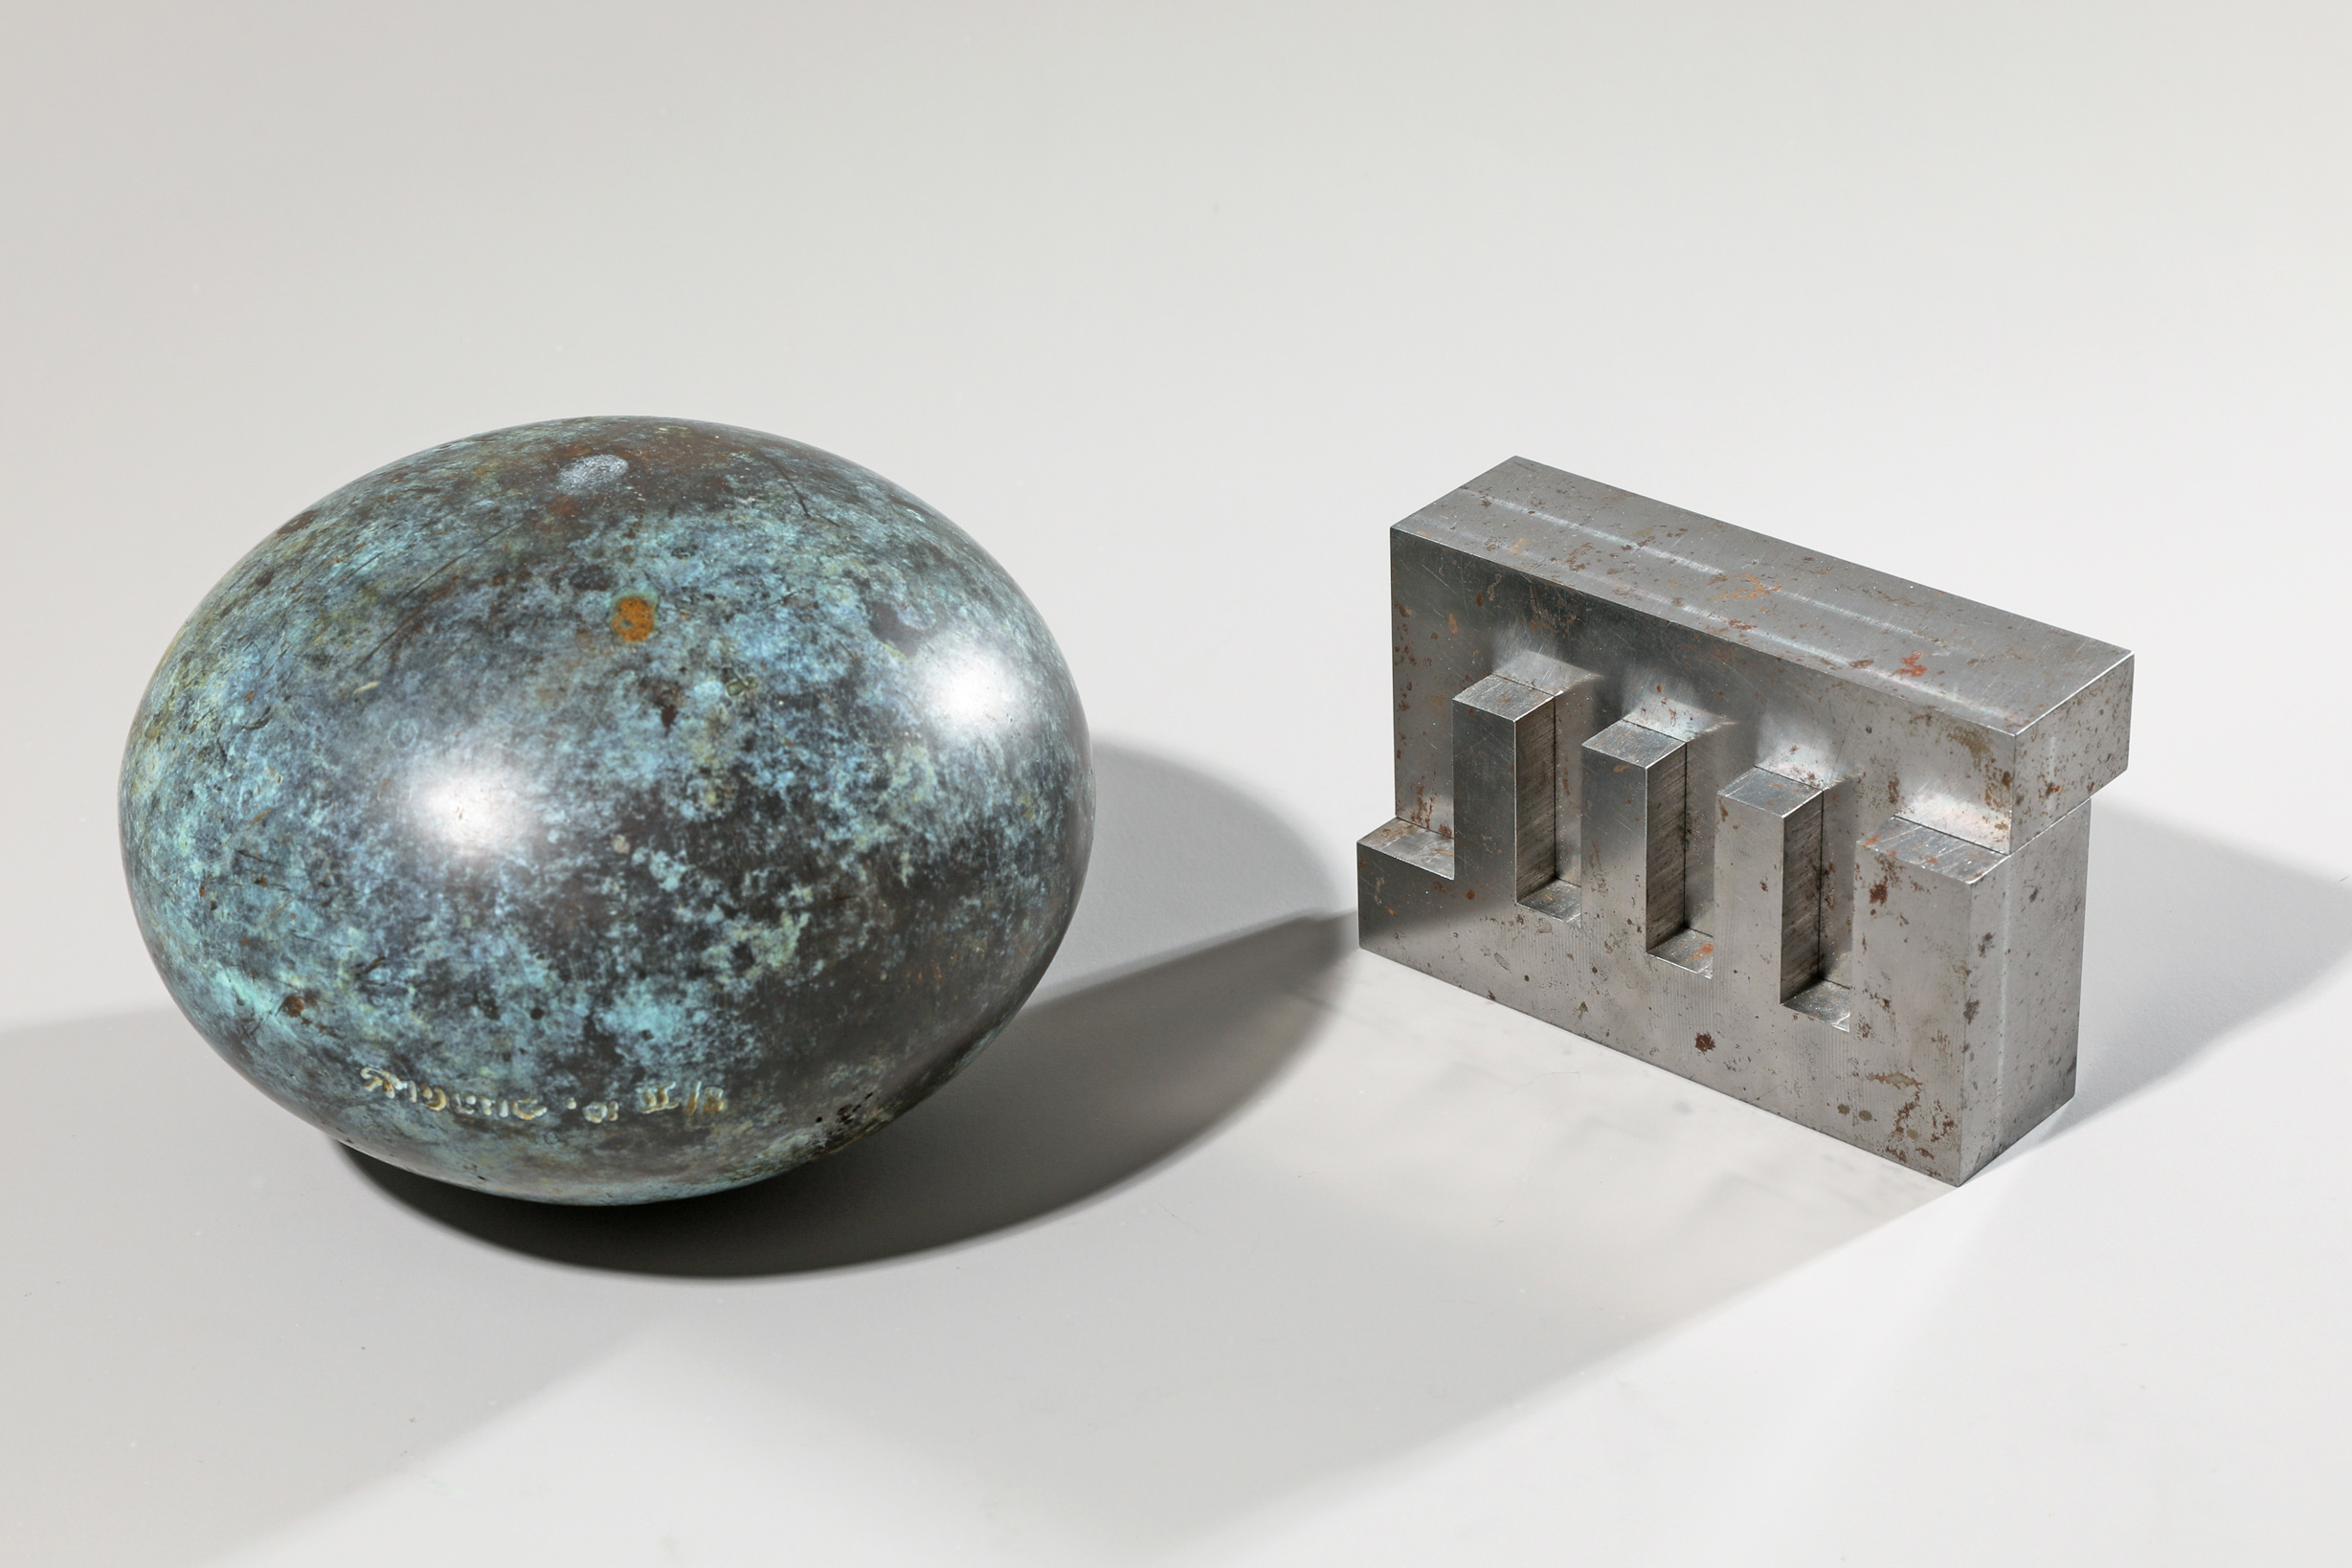 Riki Mijling, 2 objects, two-part iron sculpture, pressed bronze ball